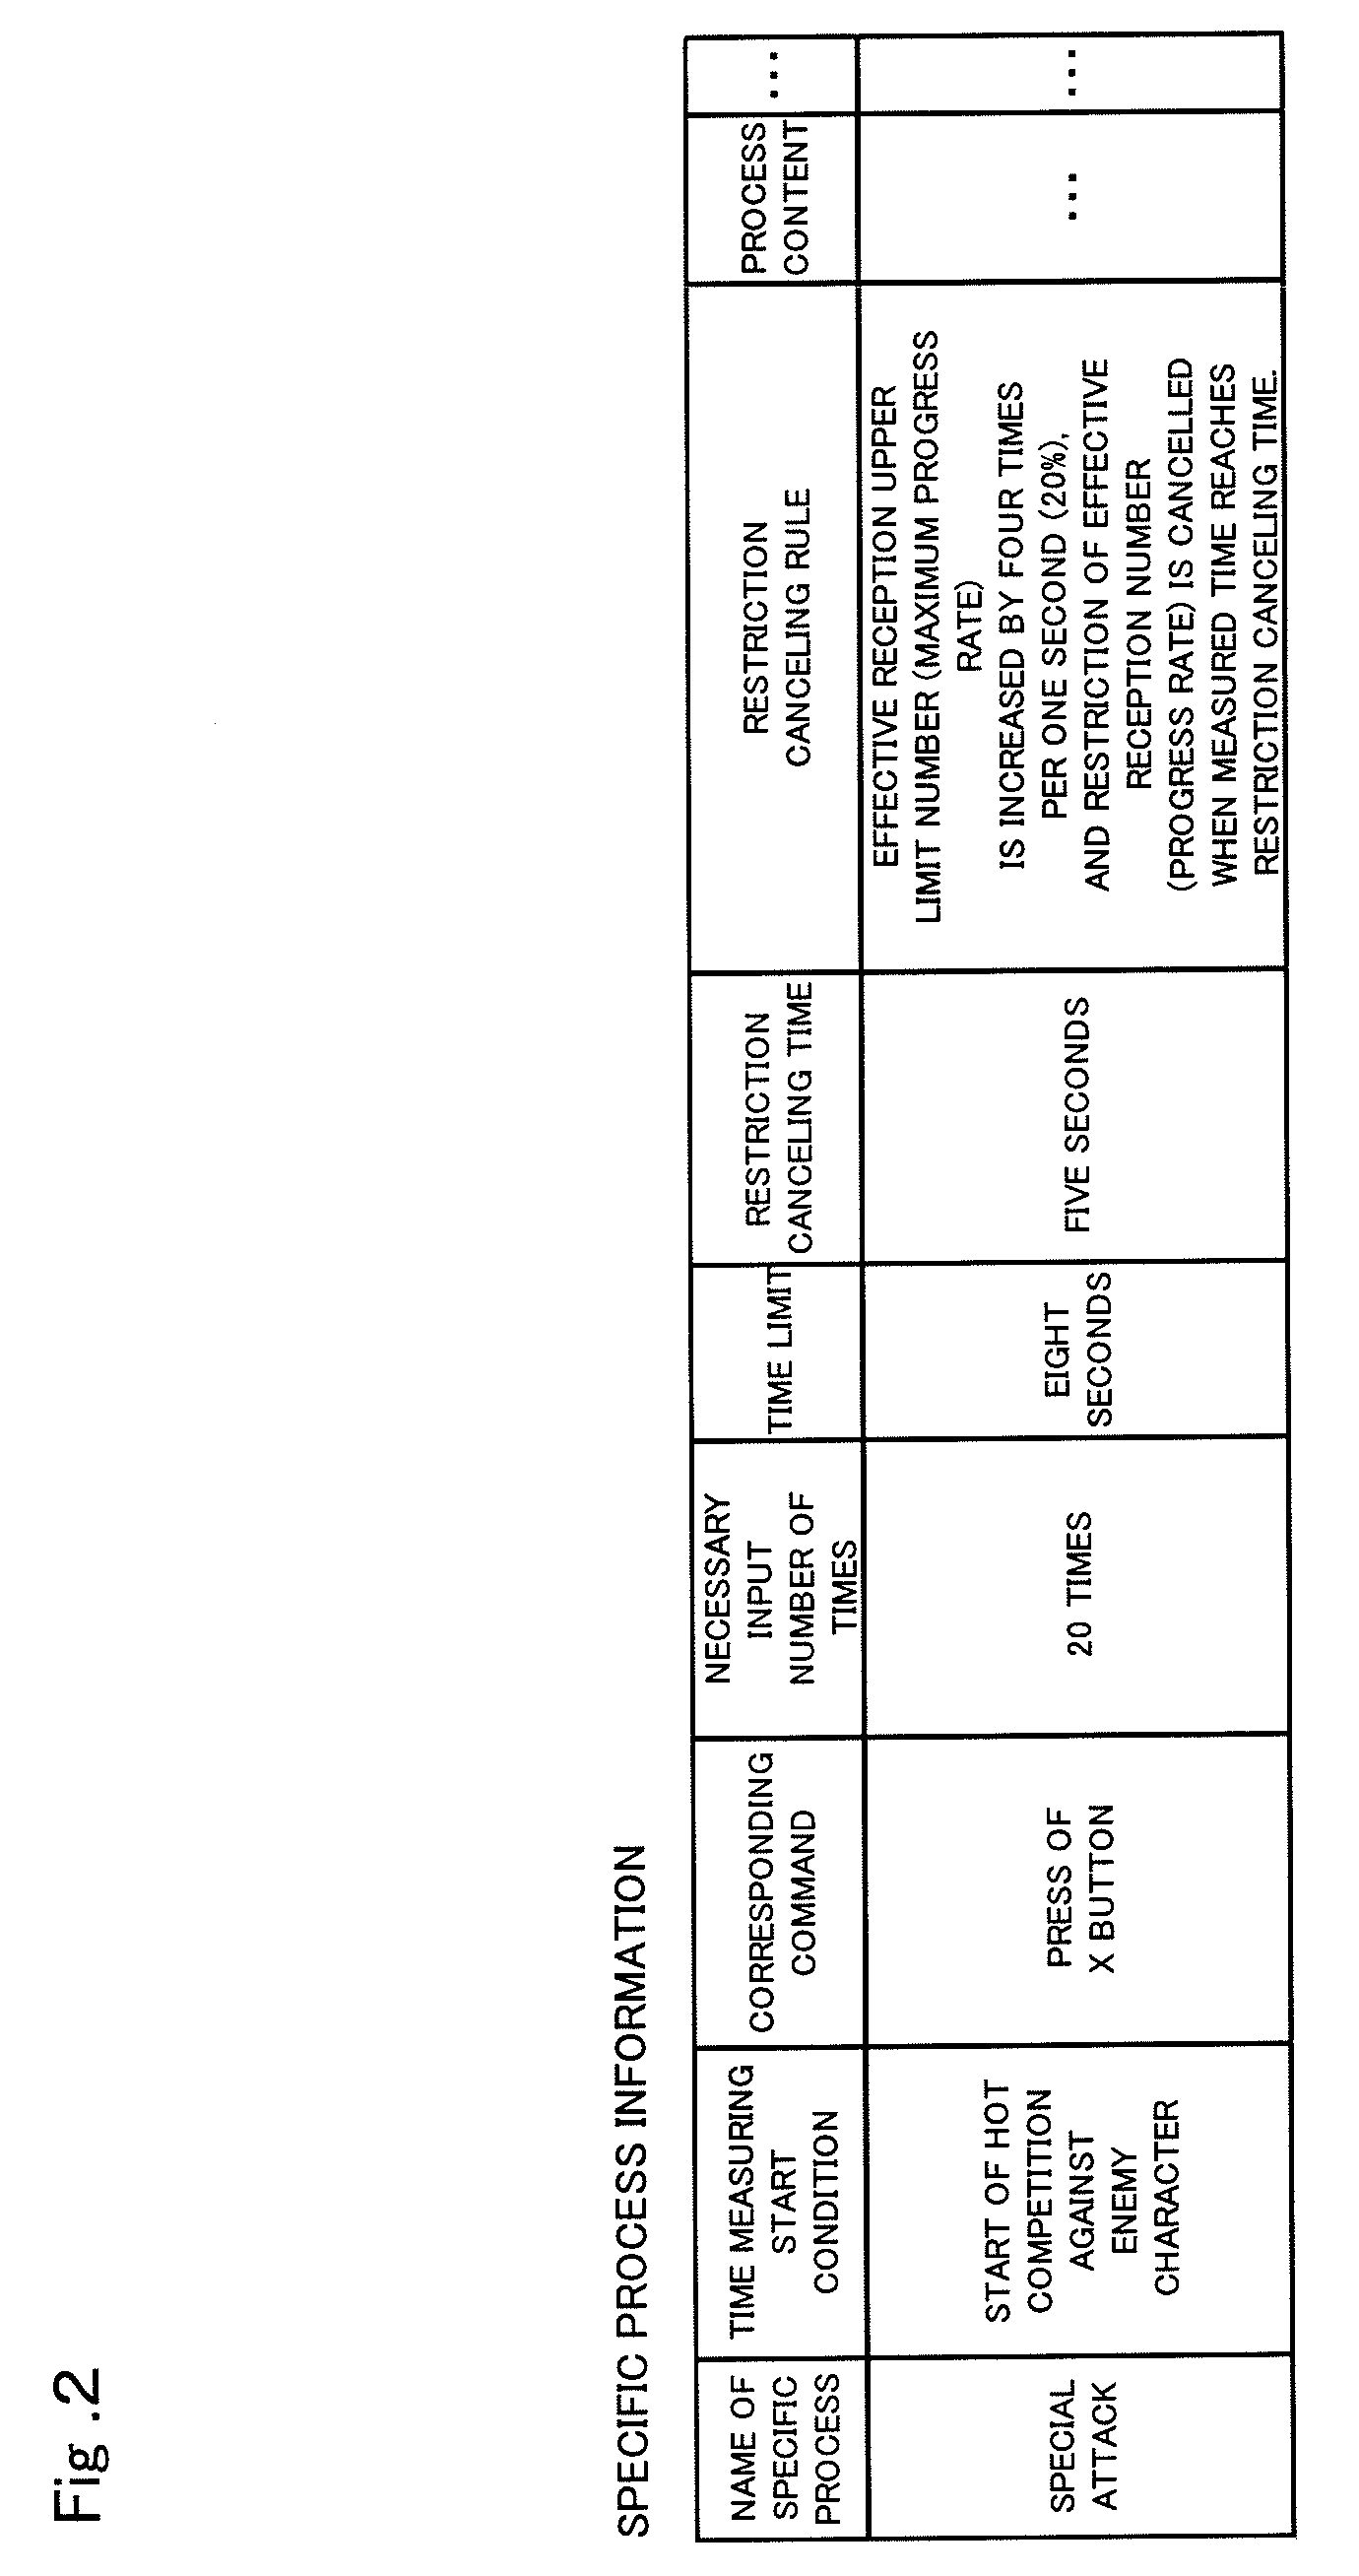 Video game processing apparatus and video game processing program